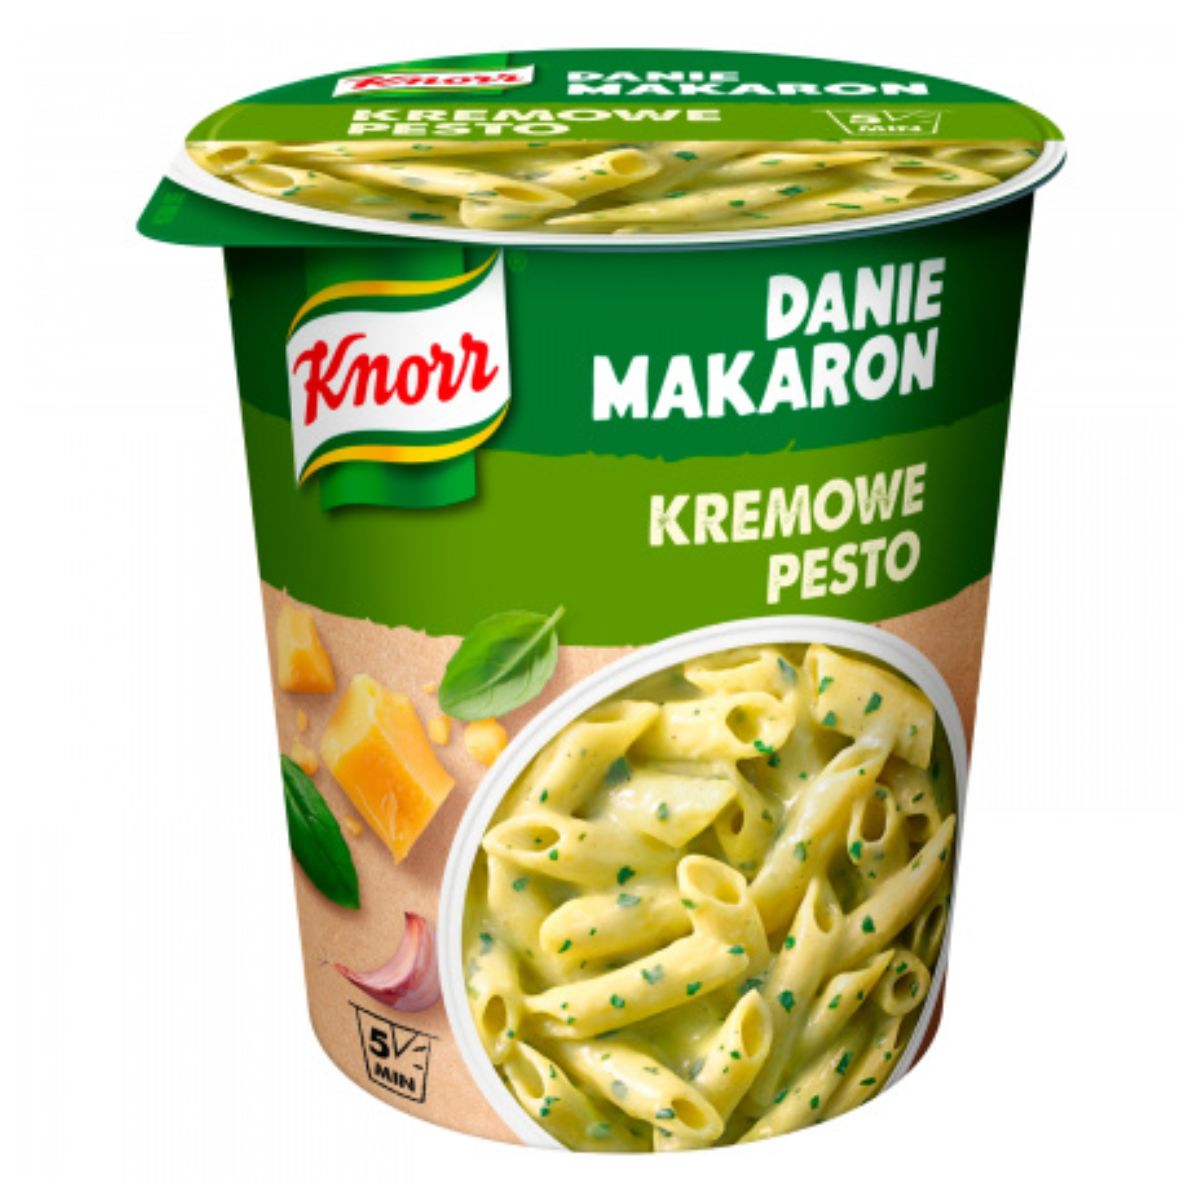 A green cup labeled "Knorr - Pot Instant Pasta Pesto - 66g" contains instant, creamy pesto pasta, featuring a tempting picture of the pasta and ingredients on the packaging.